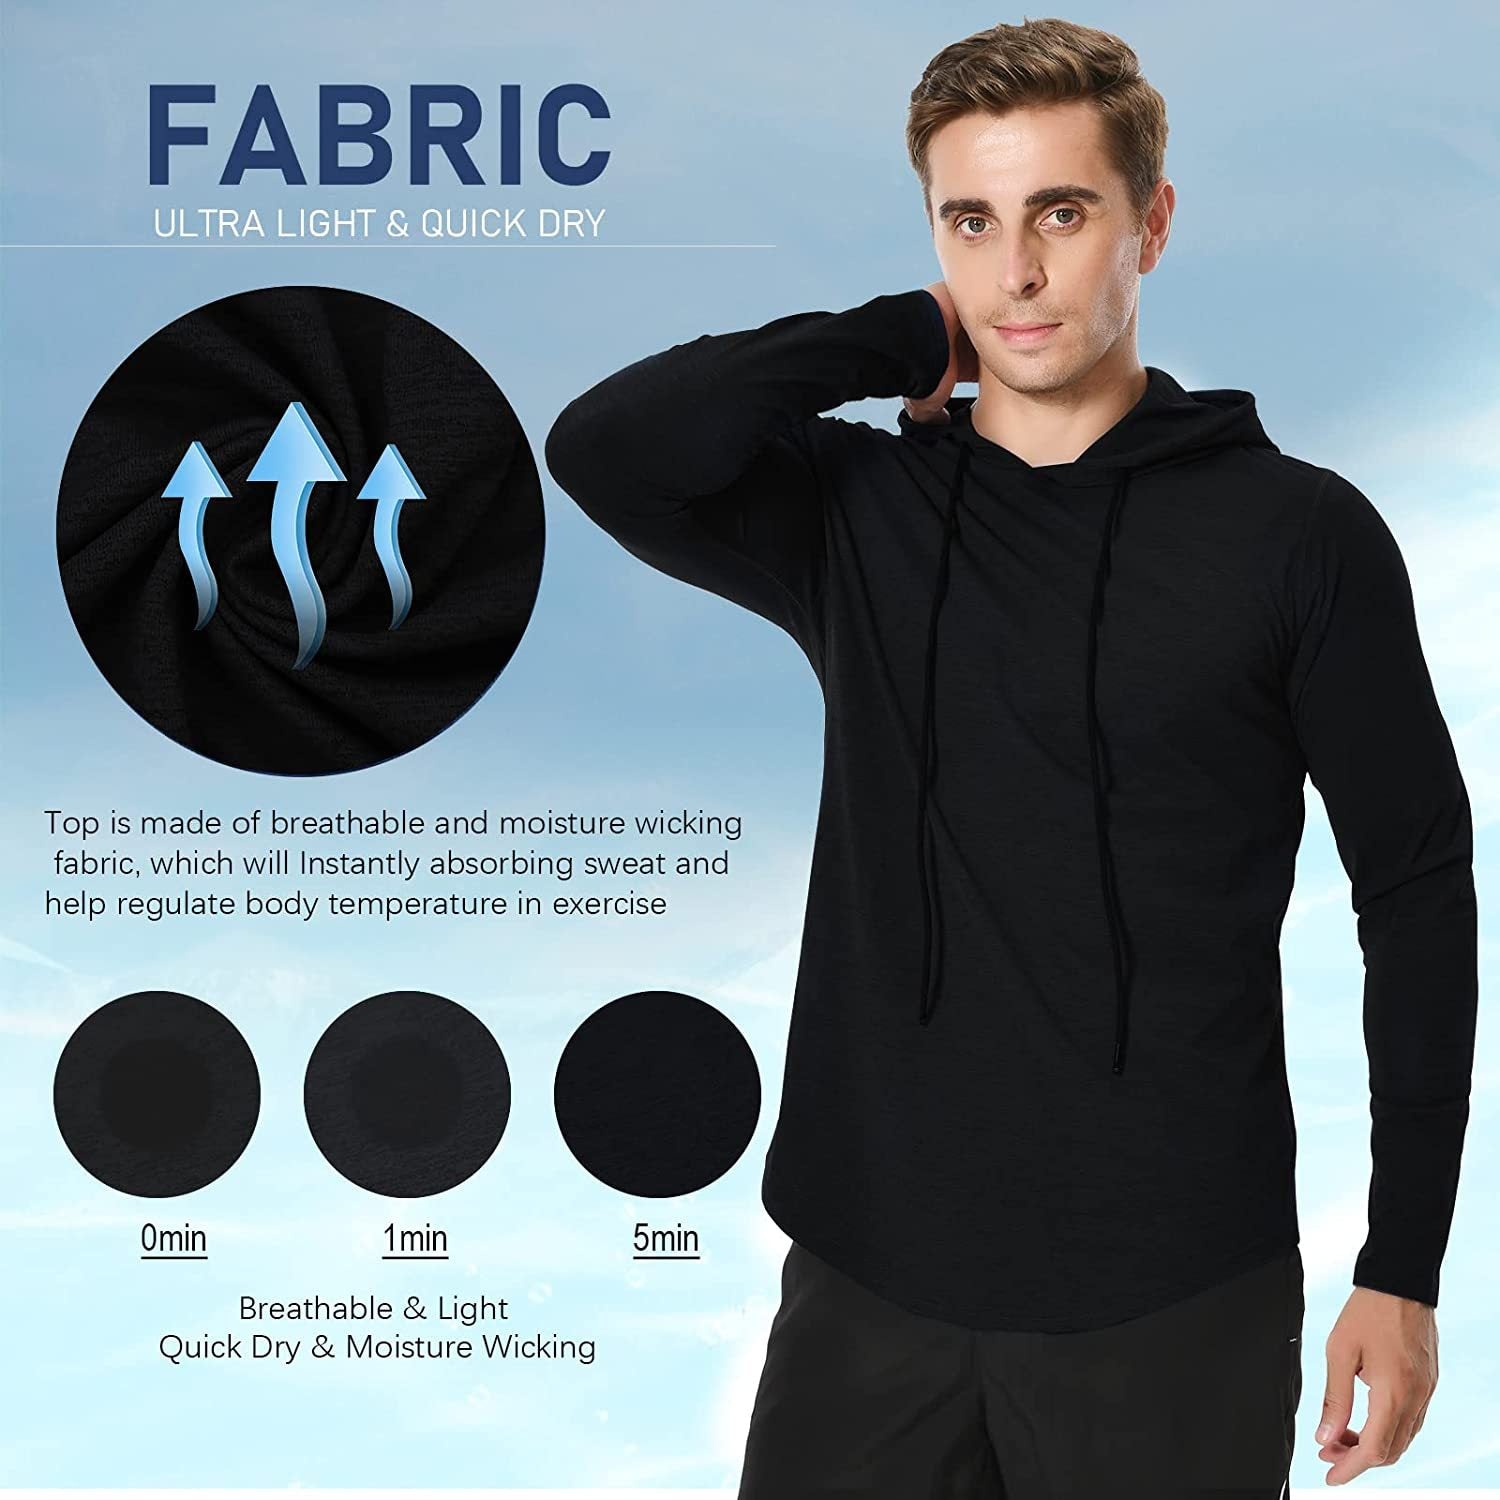 Long Sleeve Workout Hoodie Shirts for Men Lightweight Athletic